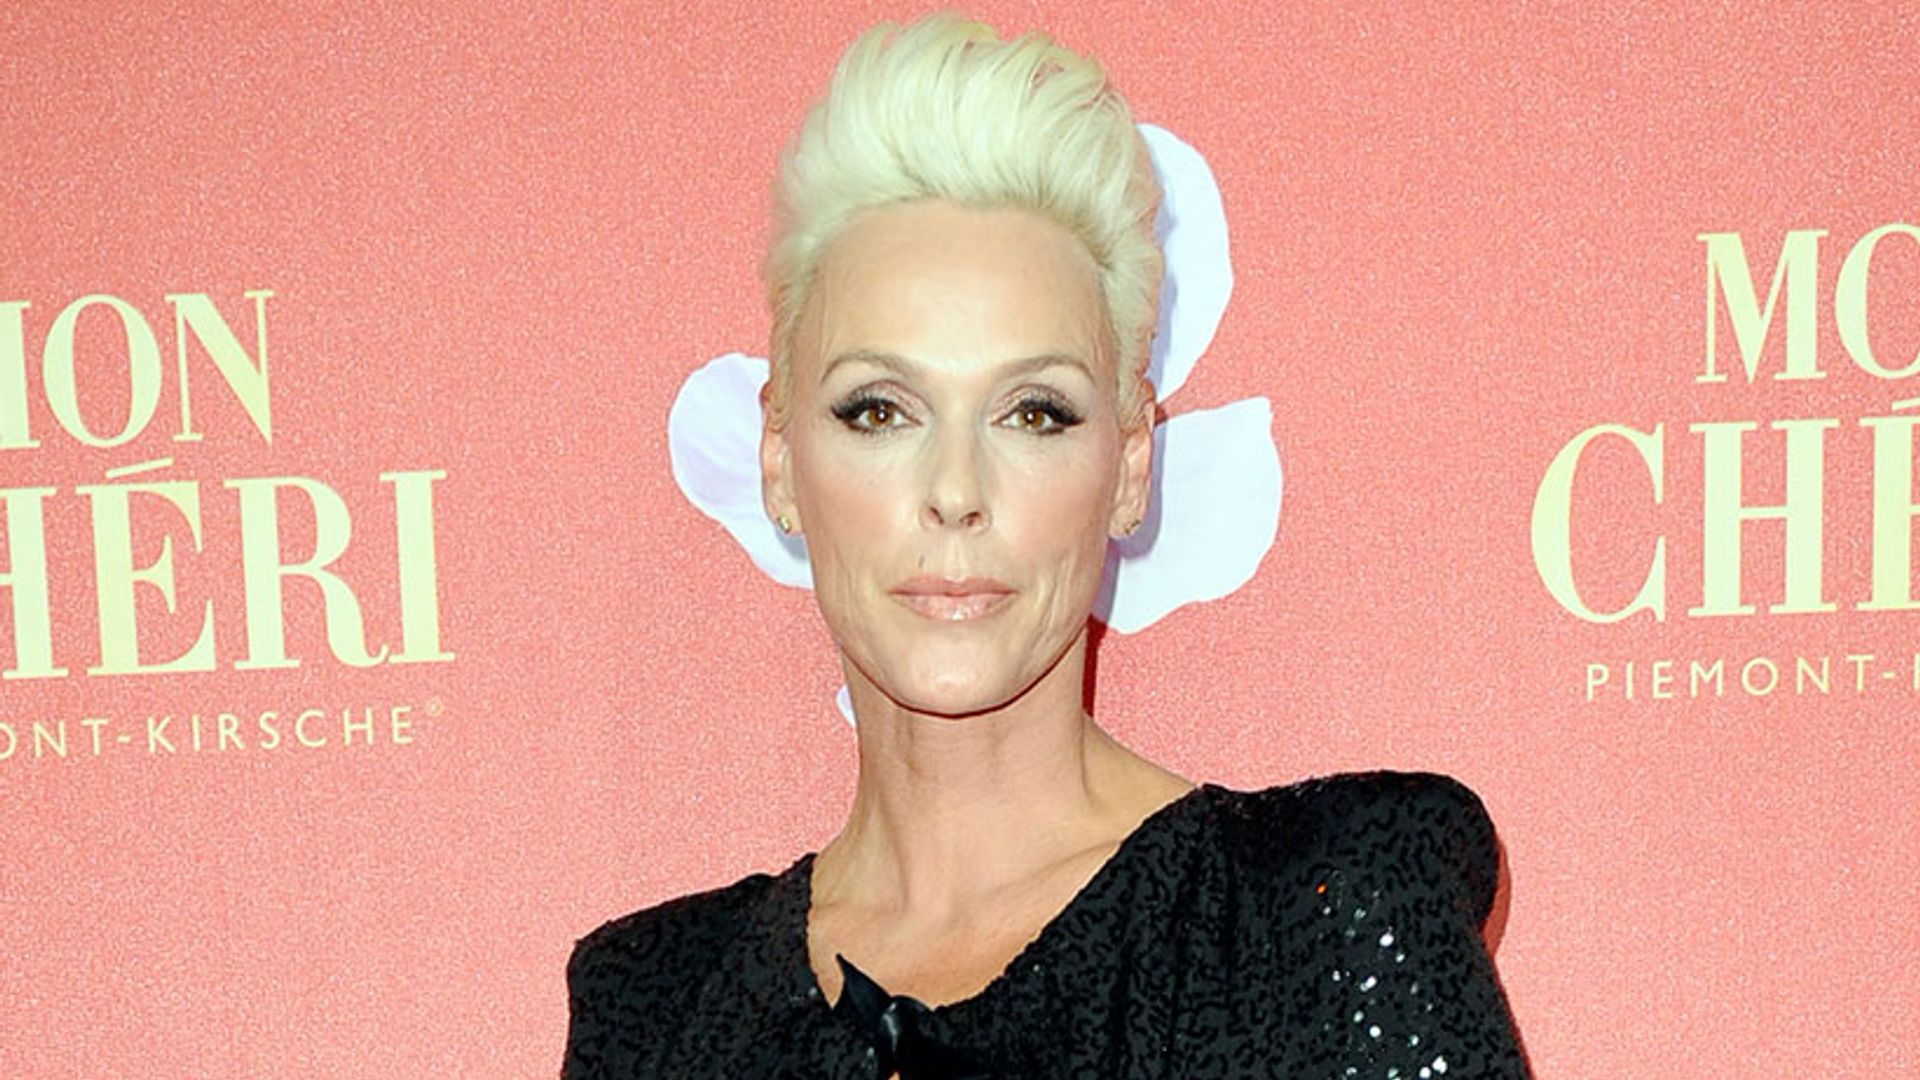 Sylvester Stallone's ex-wife Brigitte Nielsen, 54, shares first photo of newborn - and reveals sweet baby name